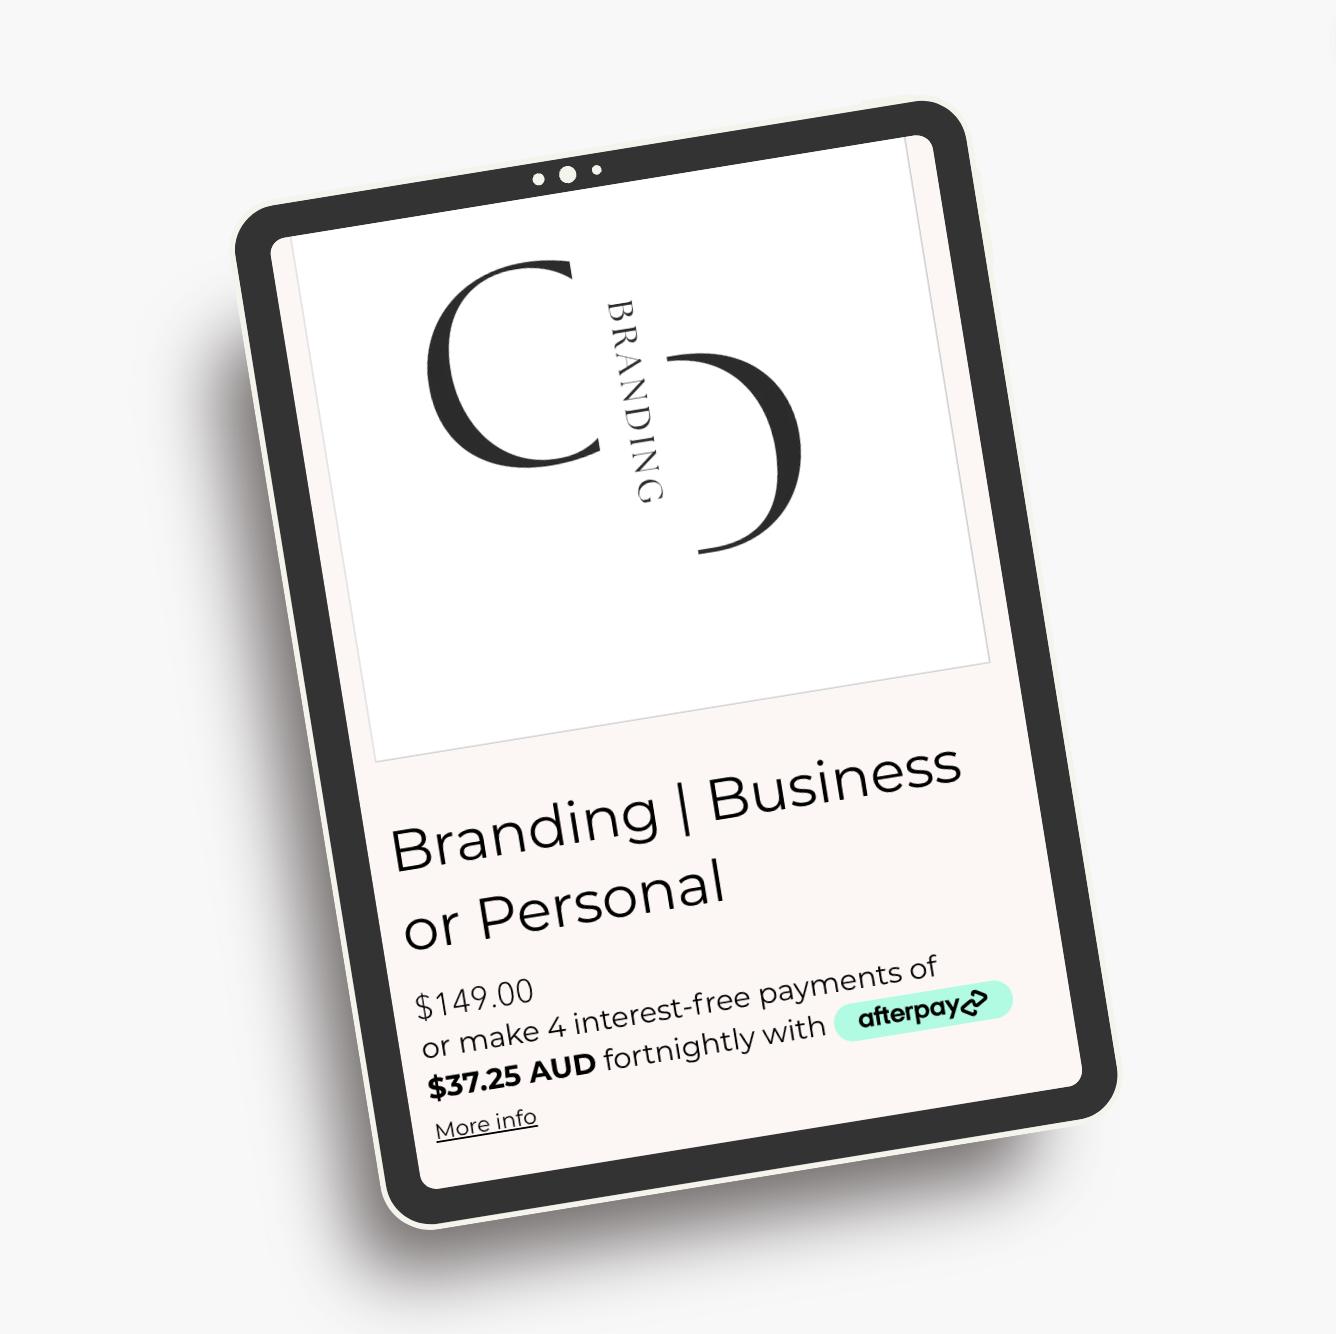 Branding | Business or Personal